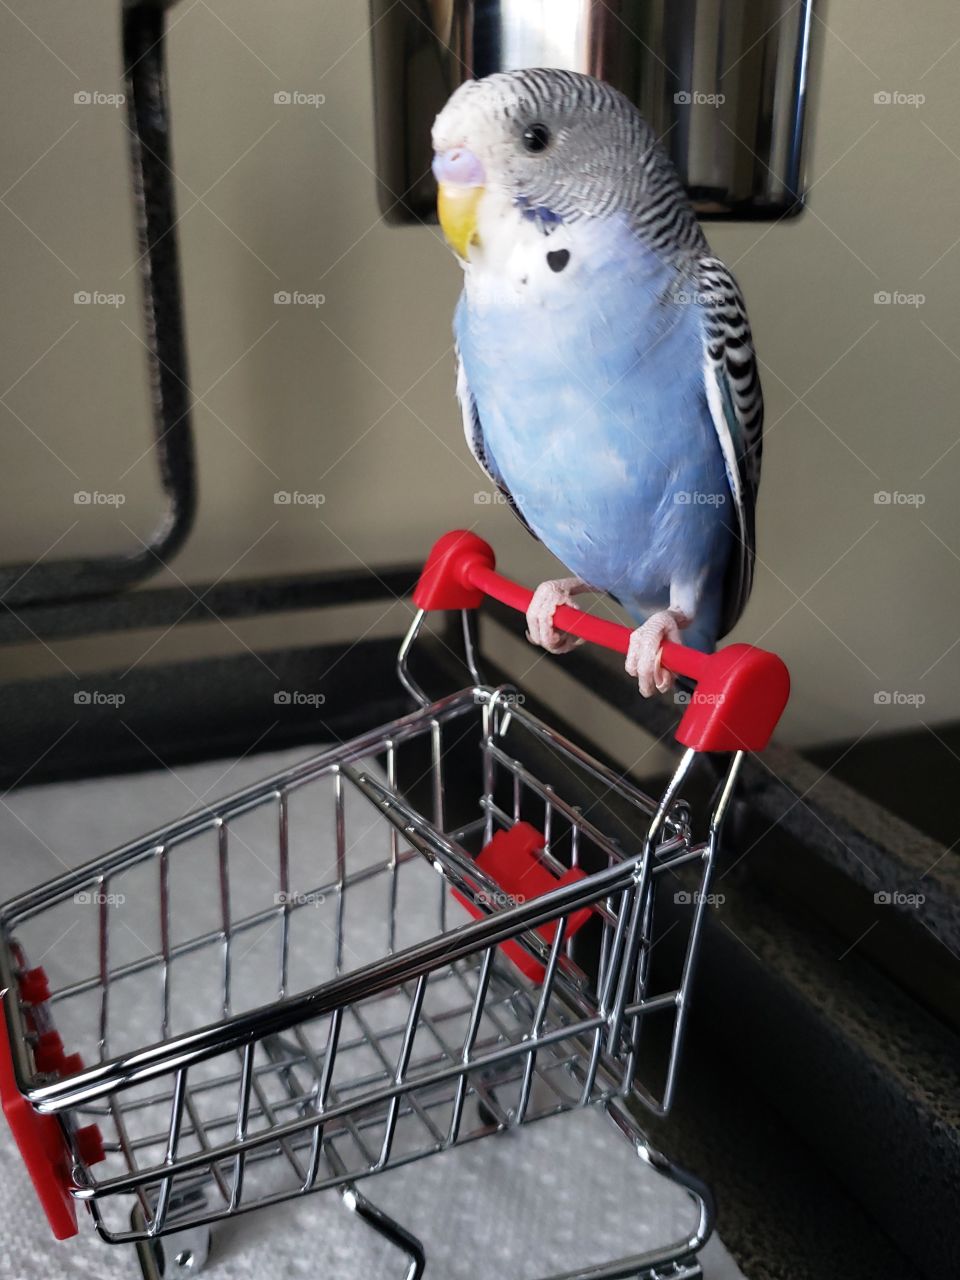 Just a budgie going shopping. Quirky birds.